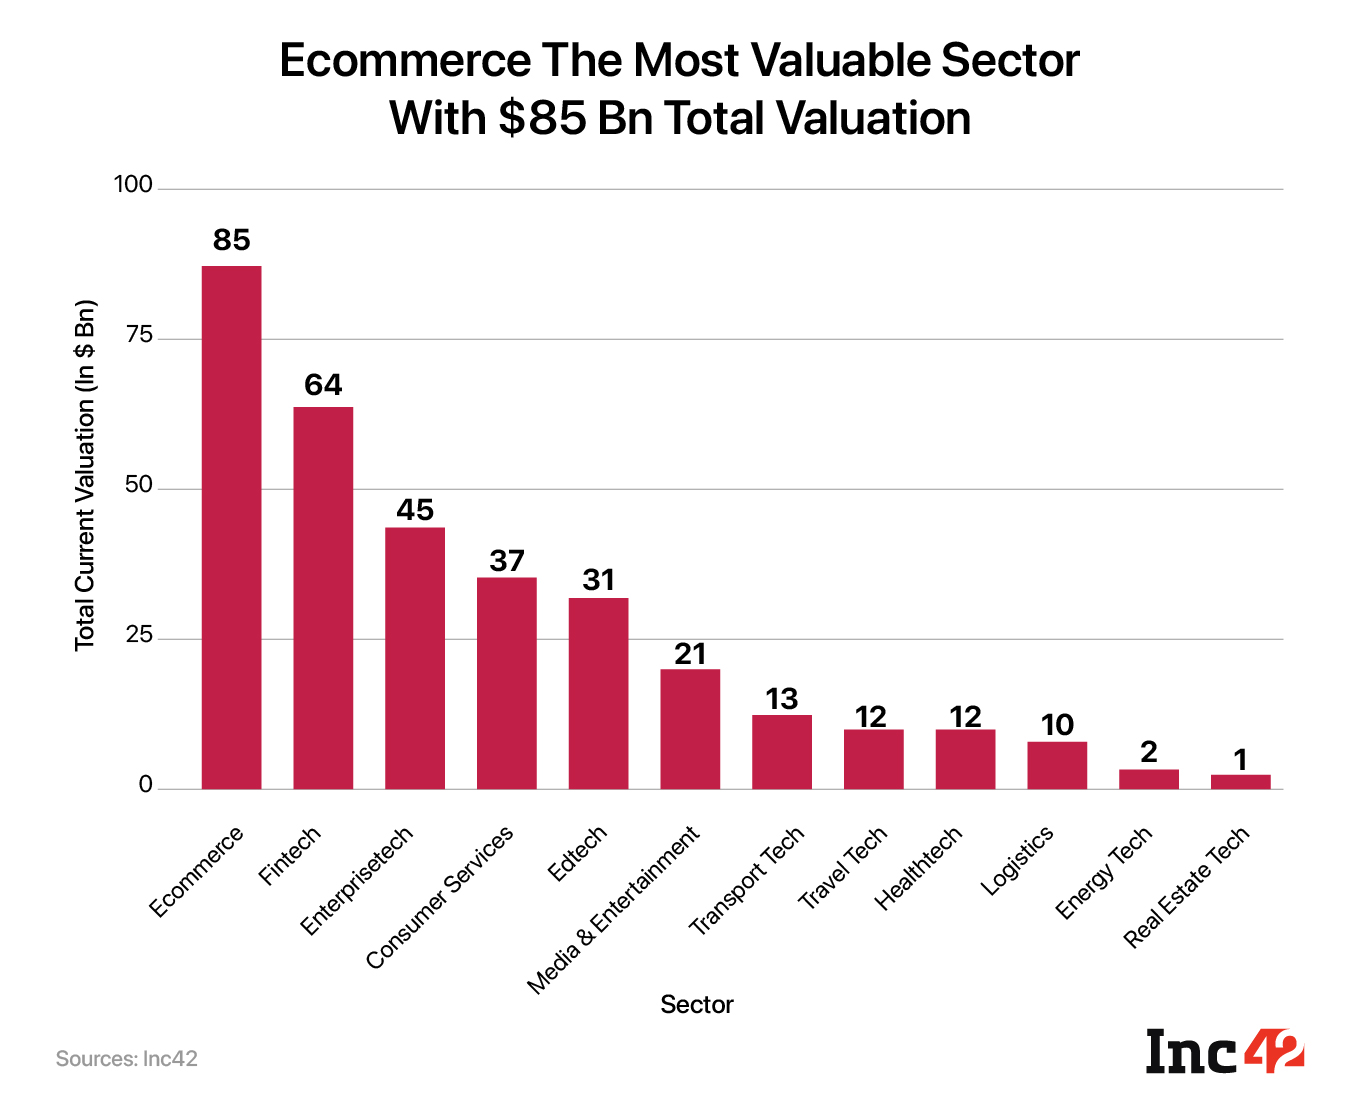 Ecommerce is the most valuable sector with $85 Bn valuation